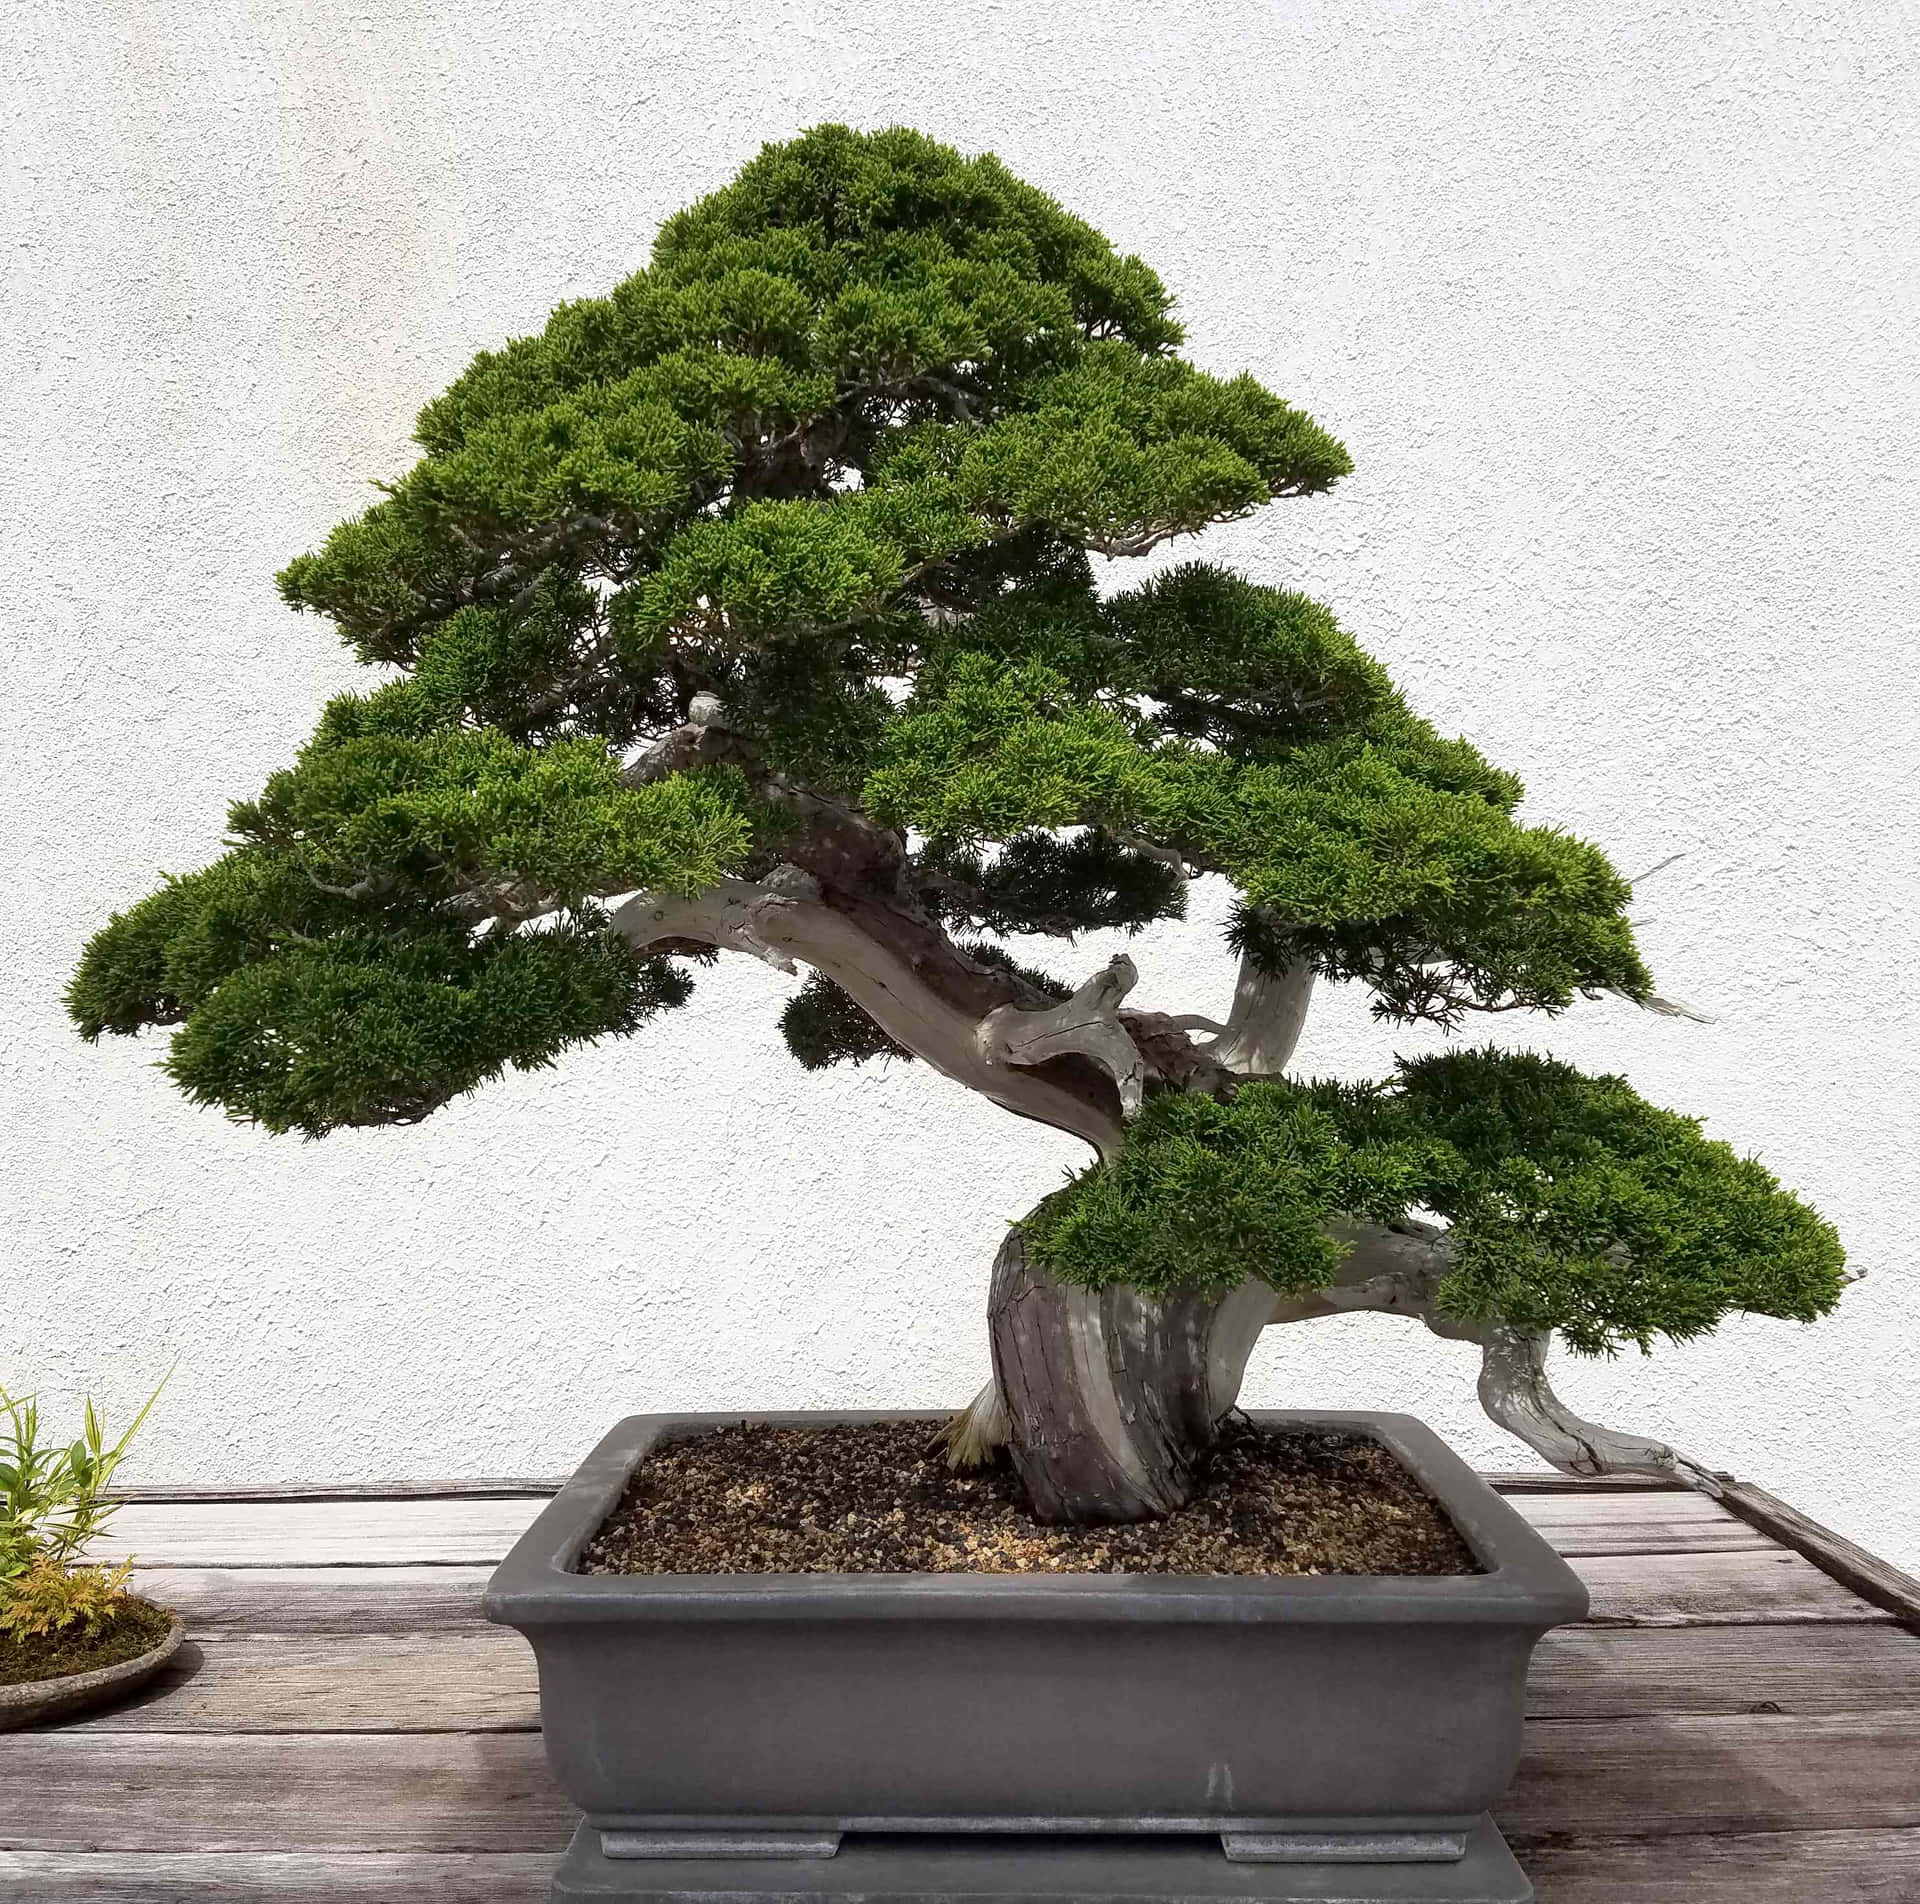 A Varied Selection of Bonsai Trees